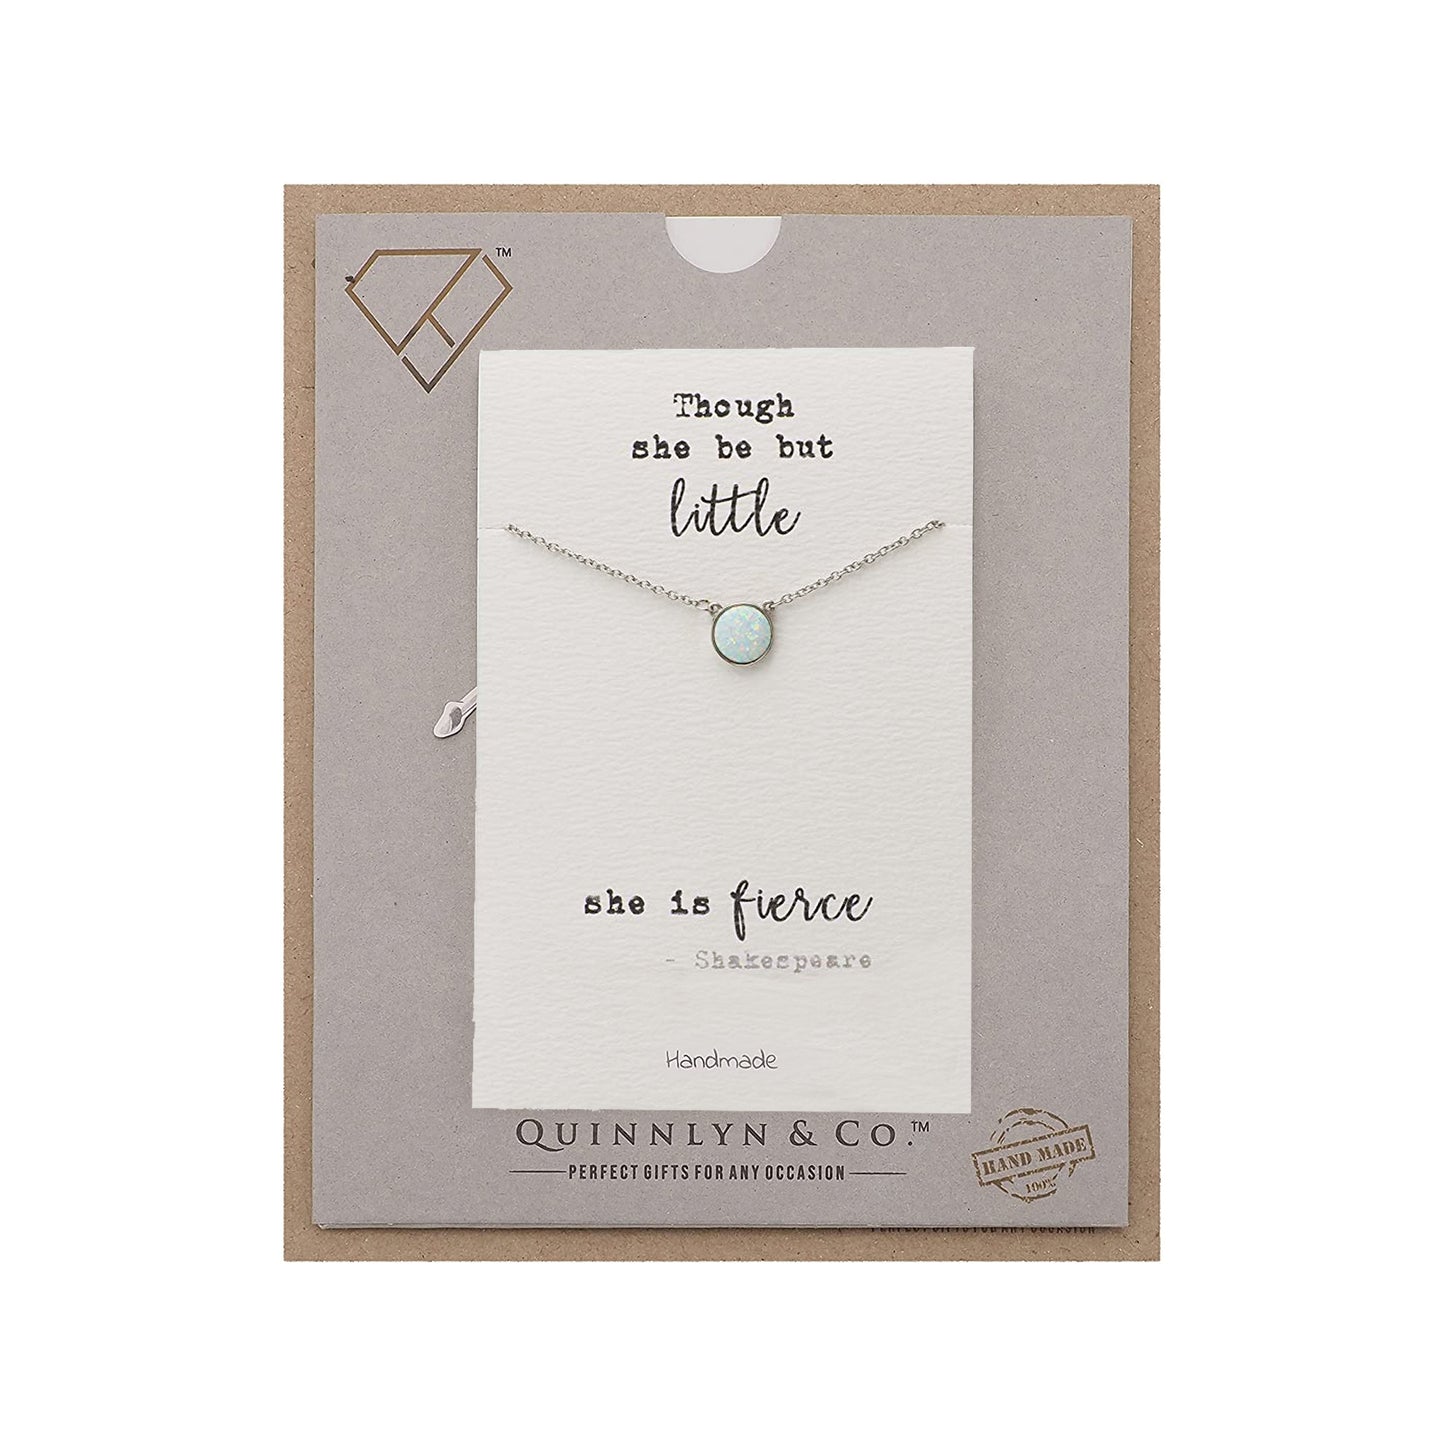 Quinnlyn & Co. White Opal Pendant Necklace, Handmade Gifts for Women with Inspirational Quote on Greeting Card